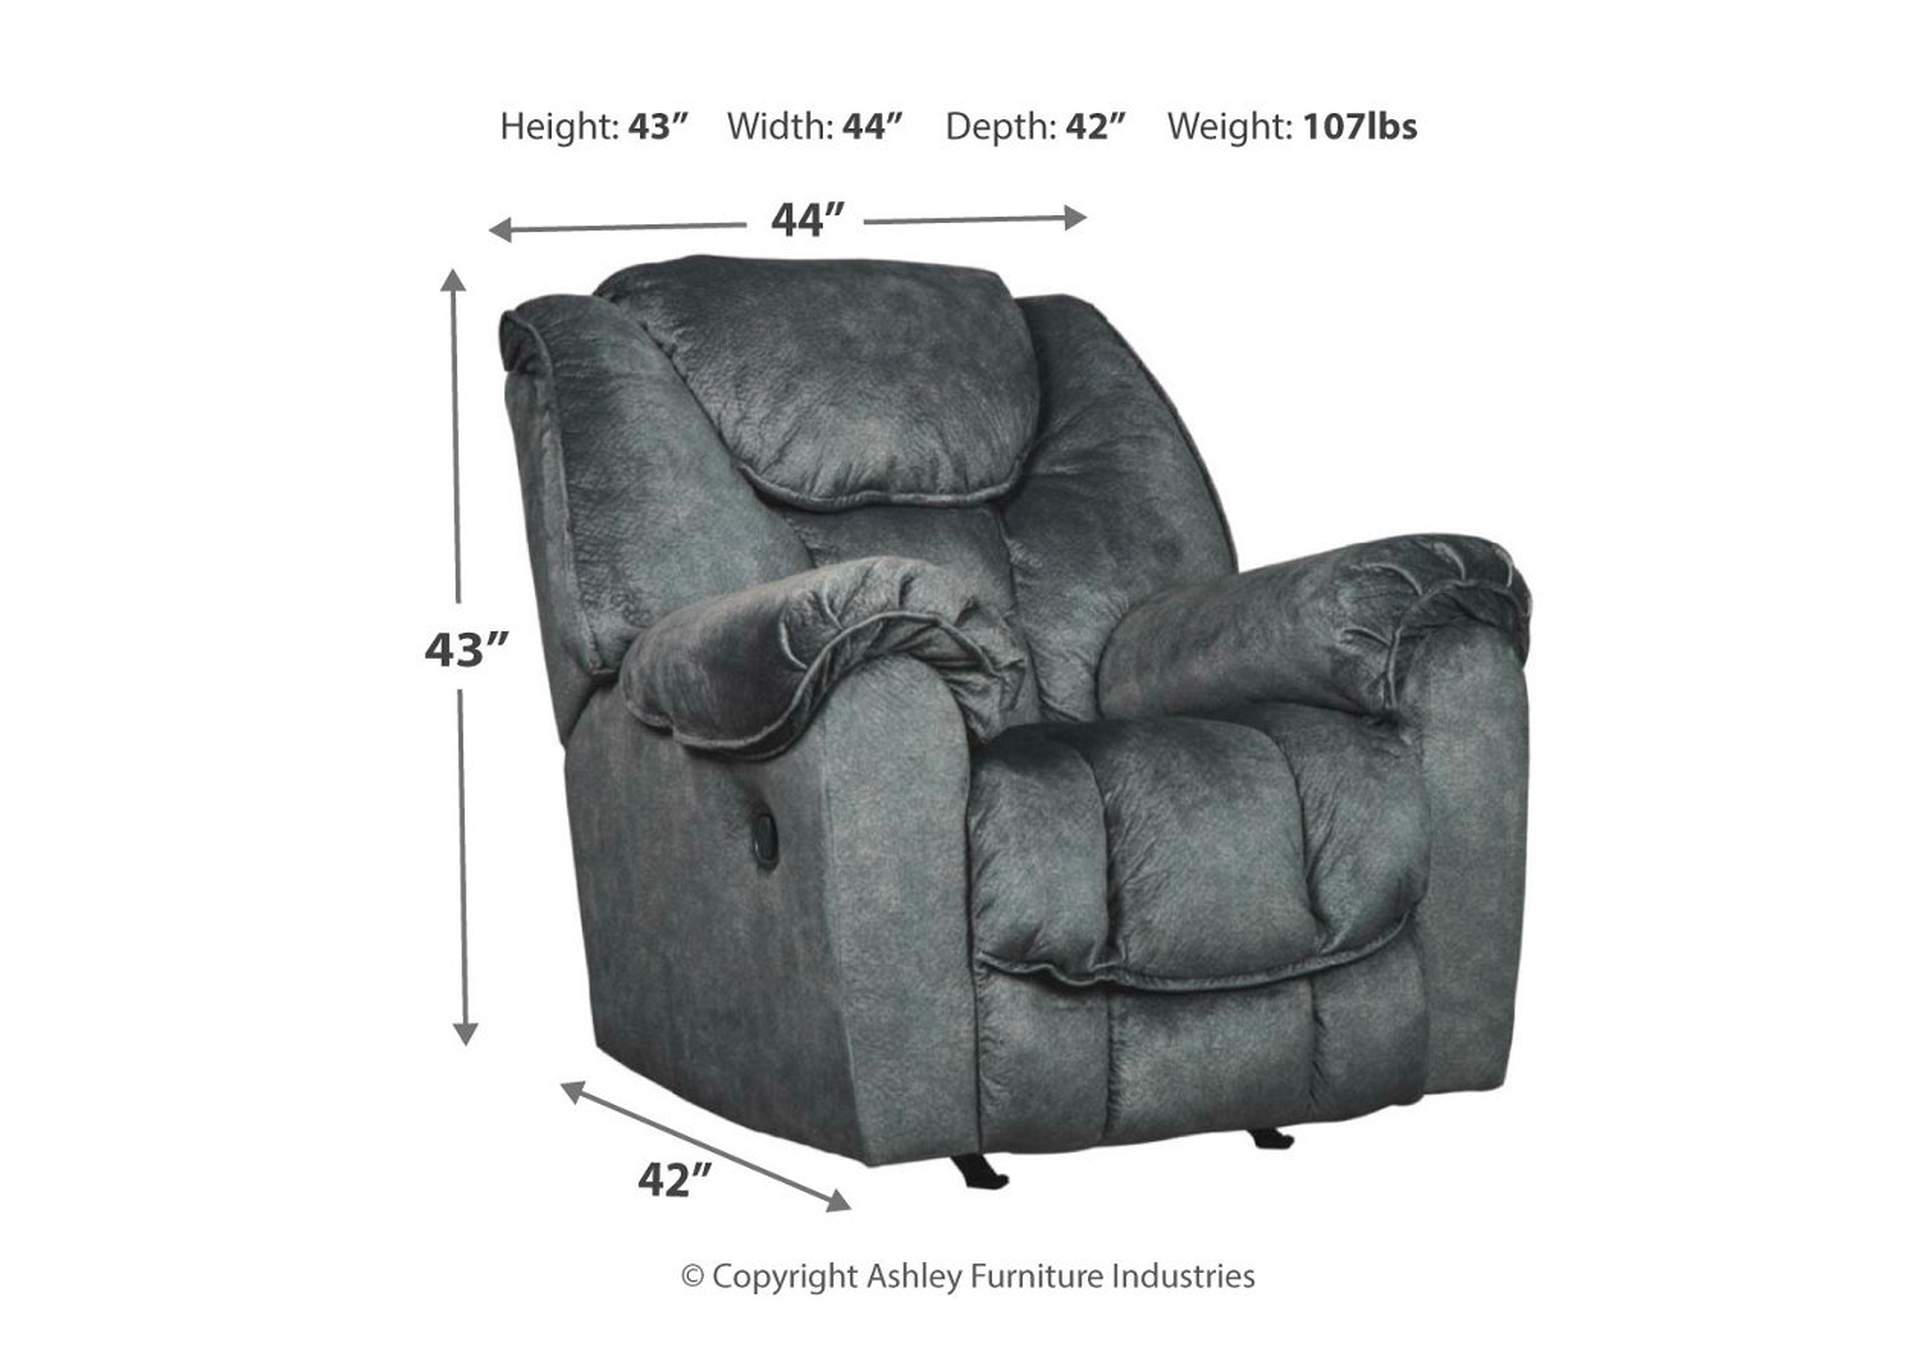 Capehorn Recliner,Signature Design By Ashley